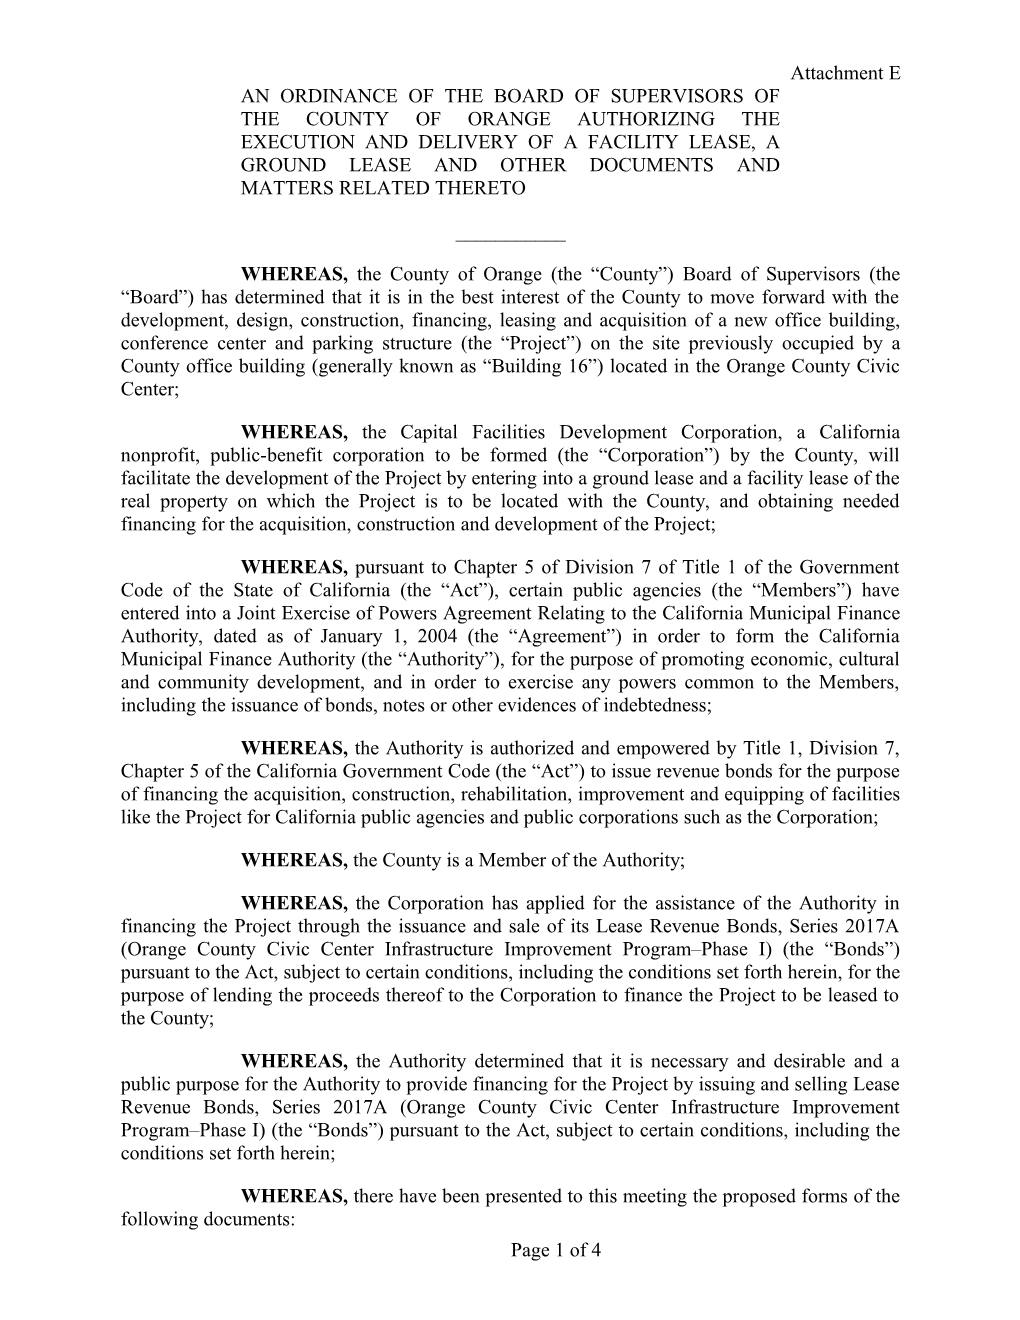 Anordinance of the Board of Supervisors of the County of Orange Authorizing the Execution